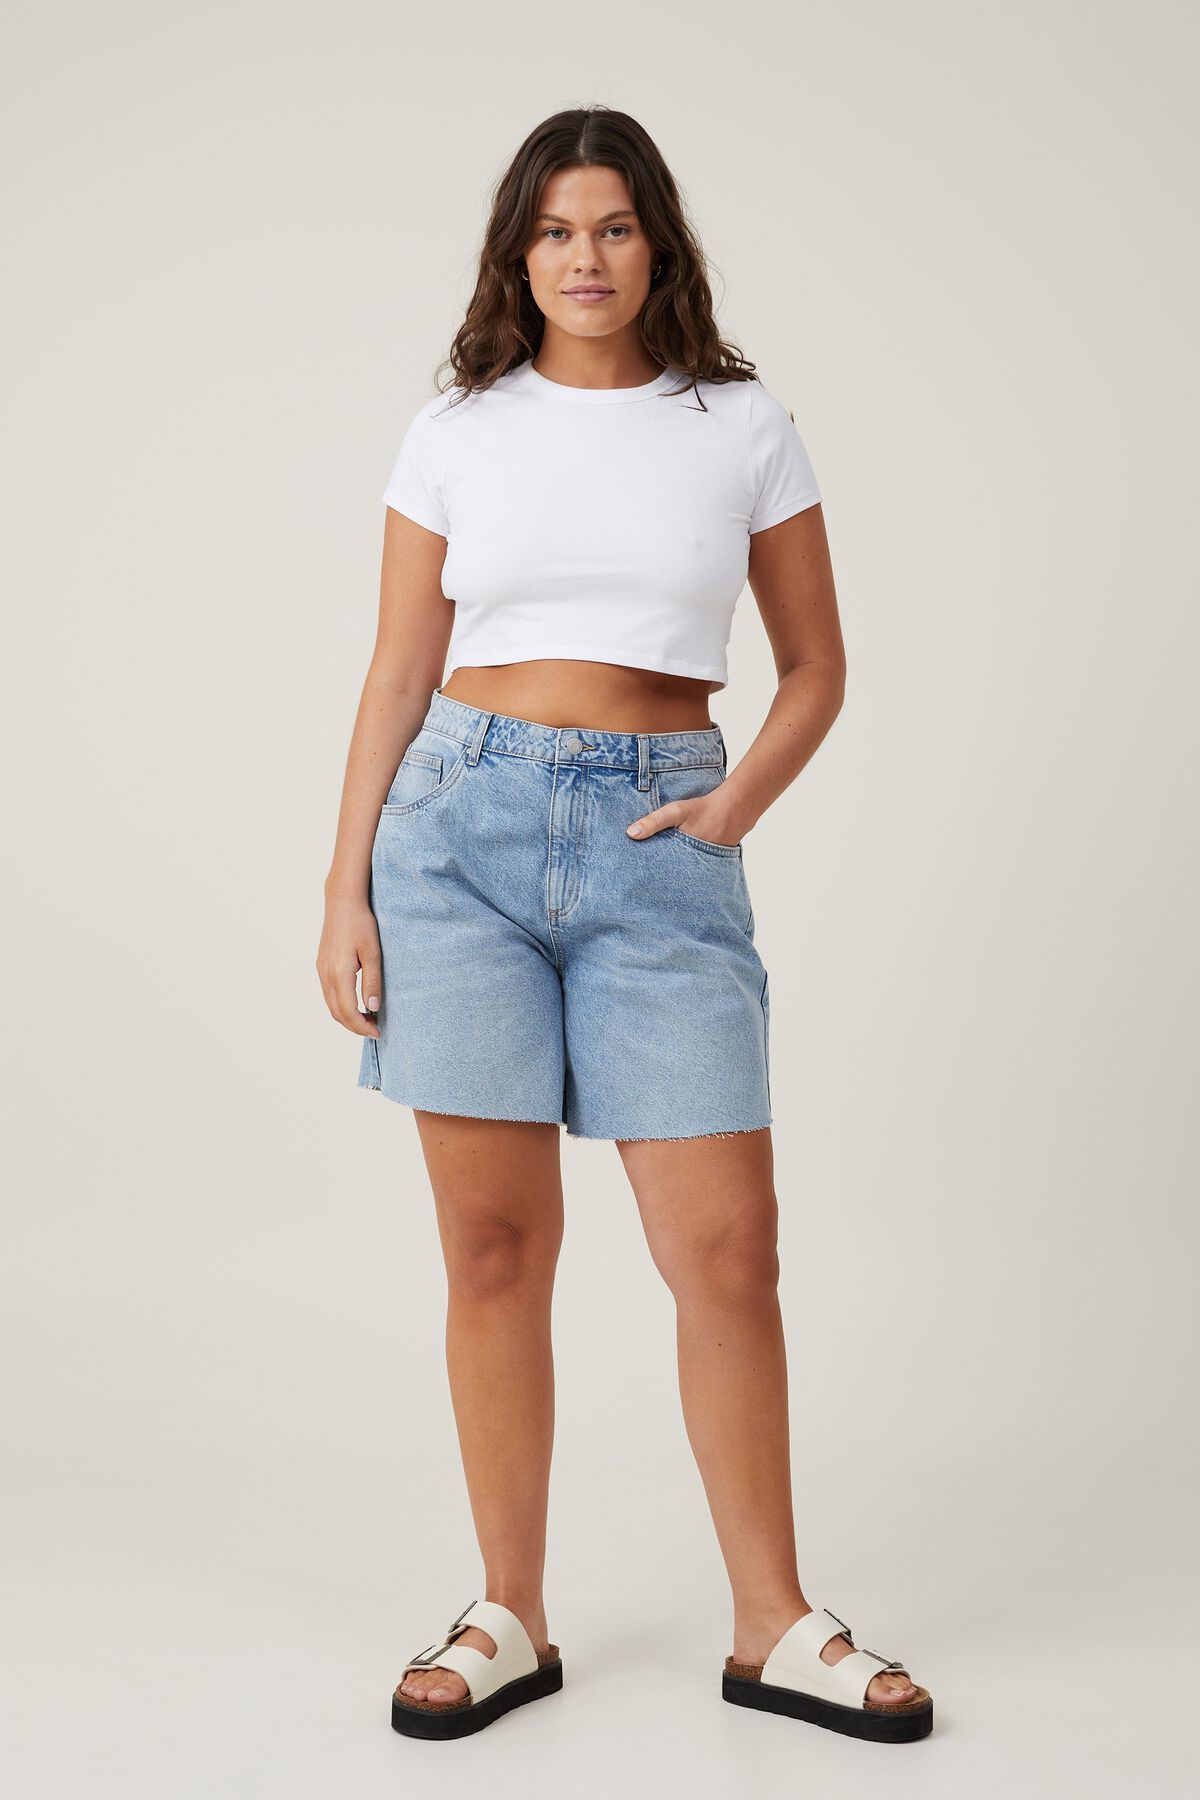 Micro Baby Crop Tee | Cotton On (ANZ)